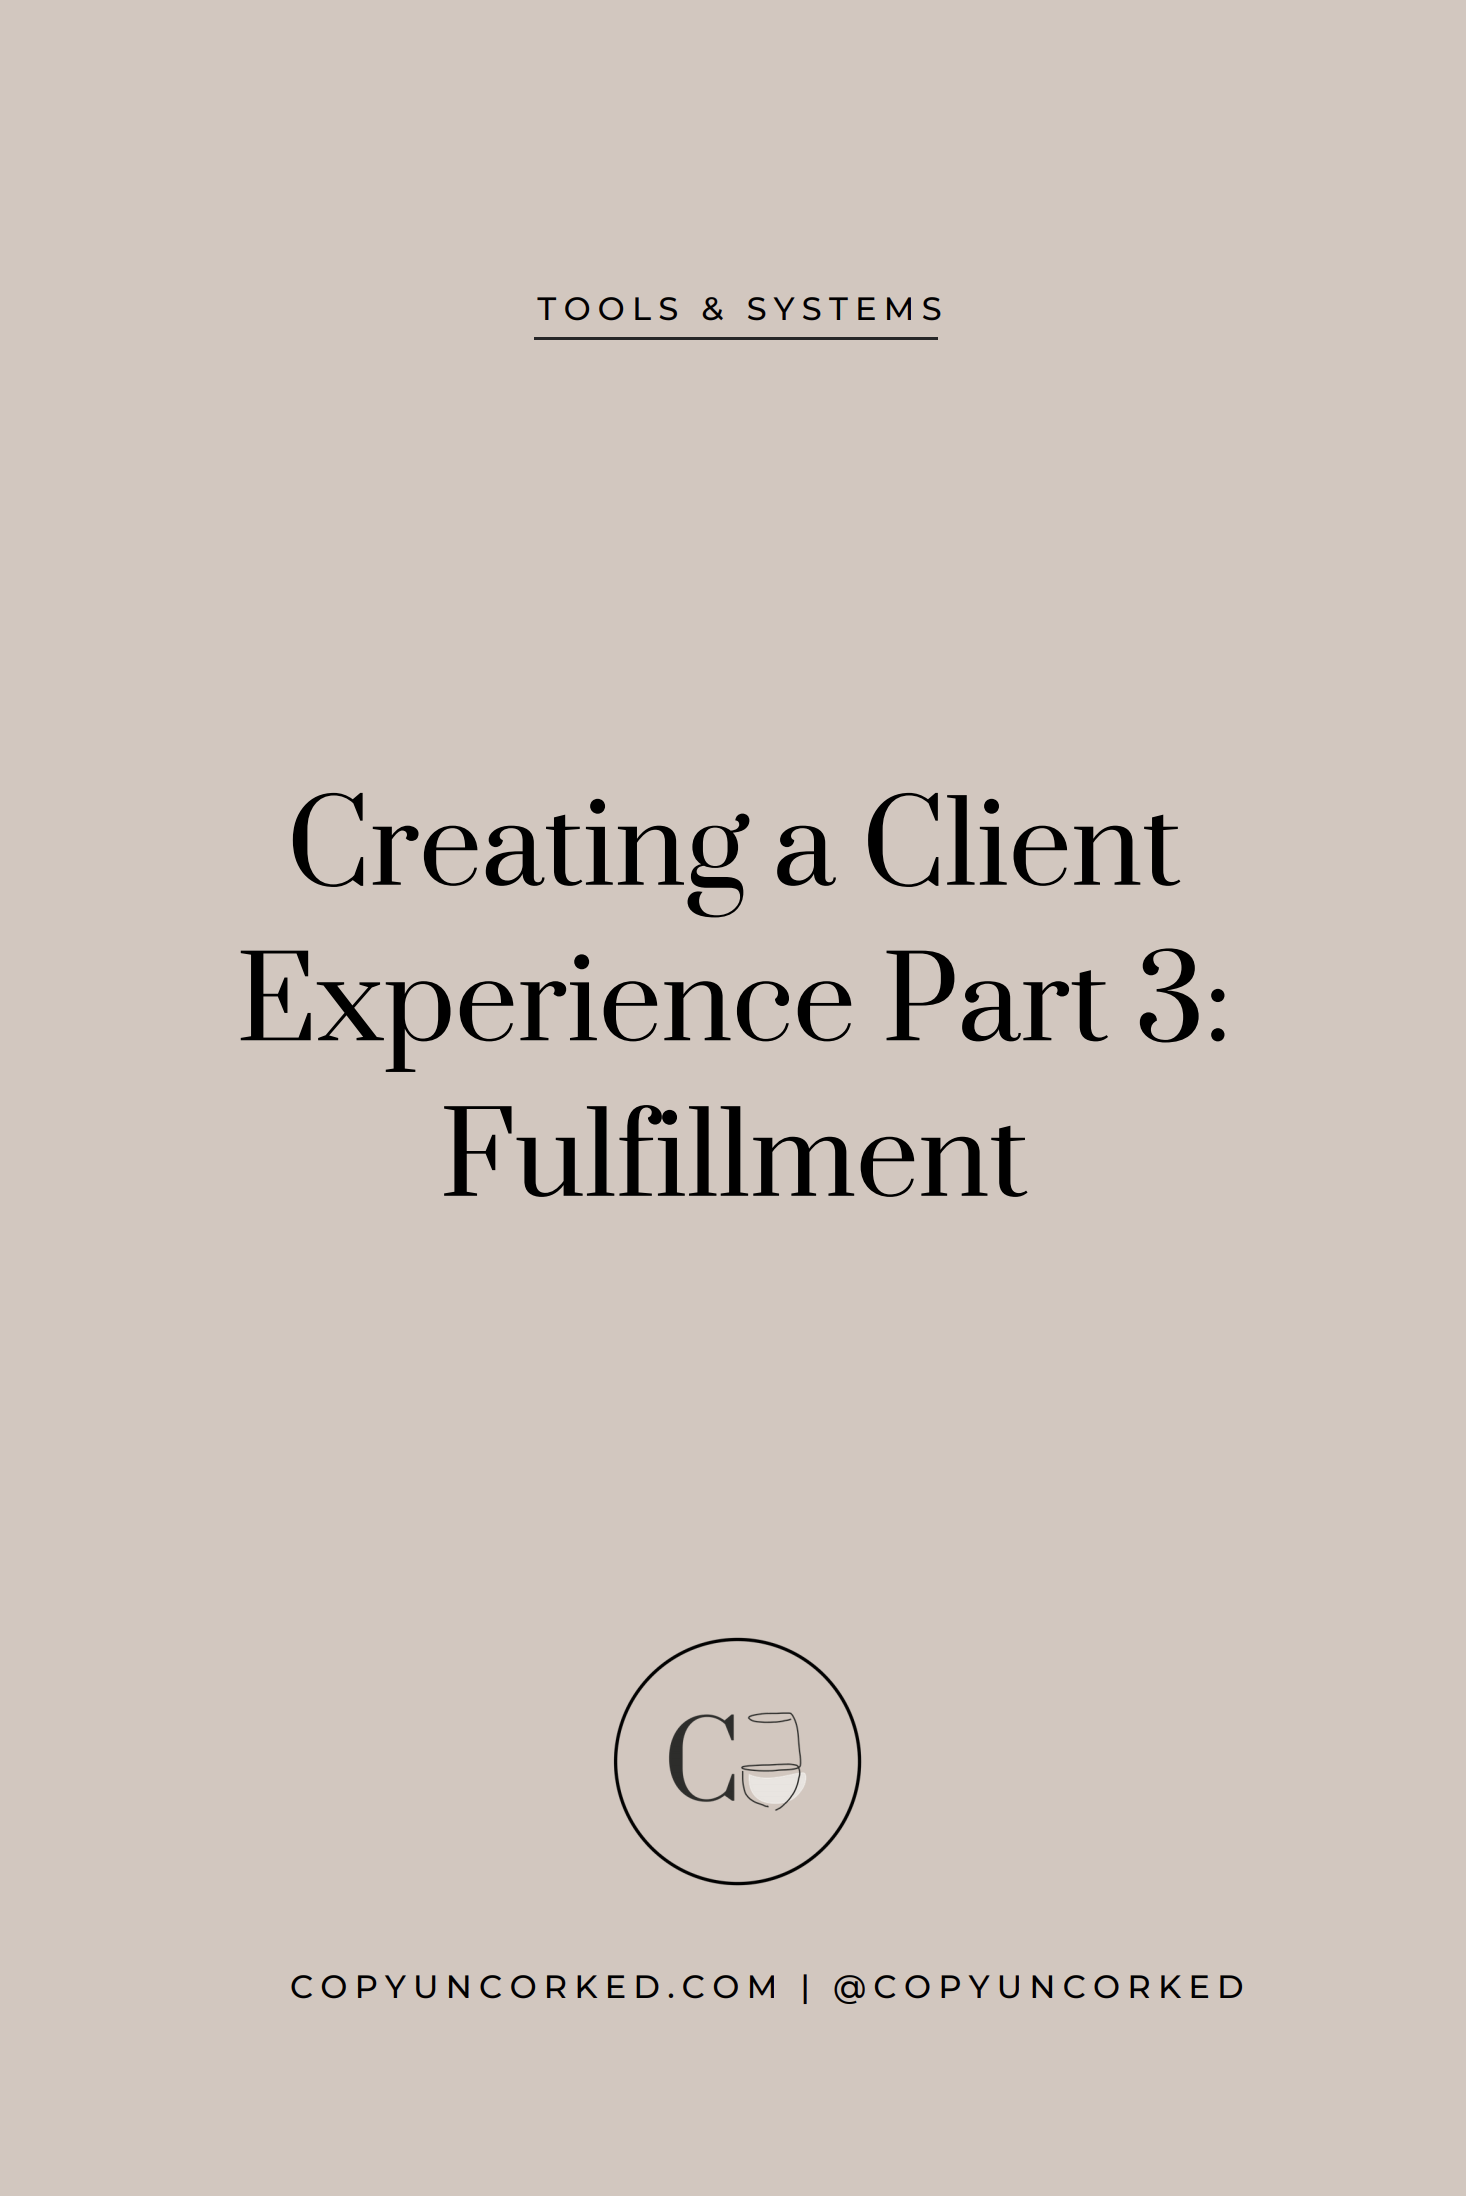 Creating a Client Experience - Part 3: Fulfillment - copyuncorked.com